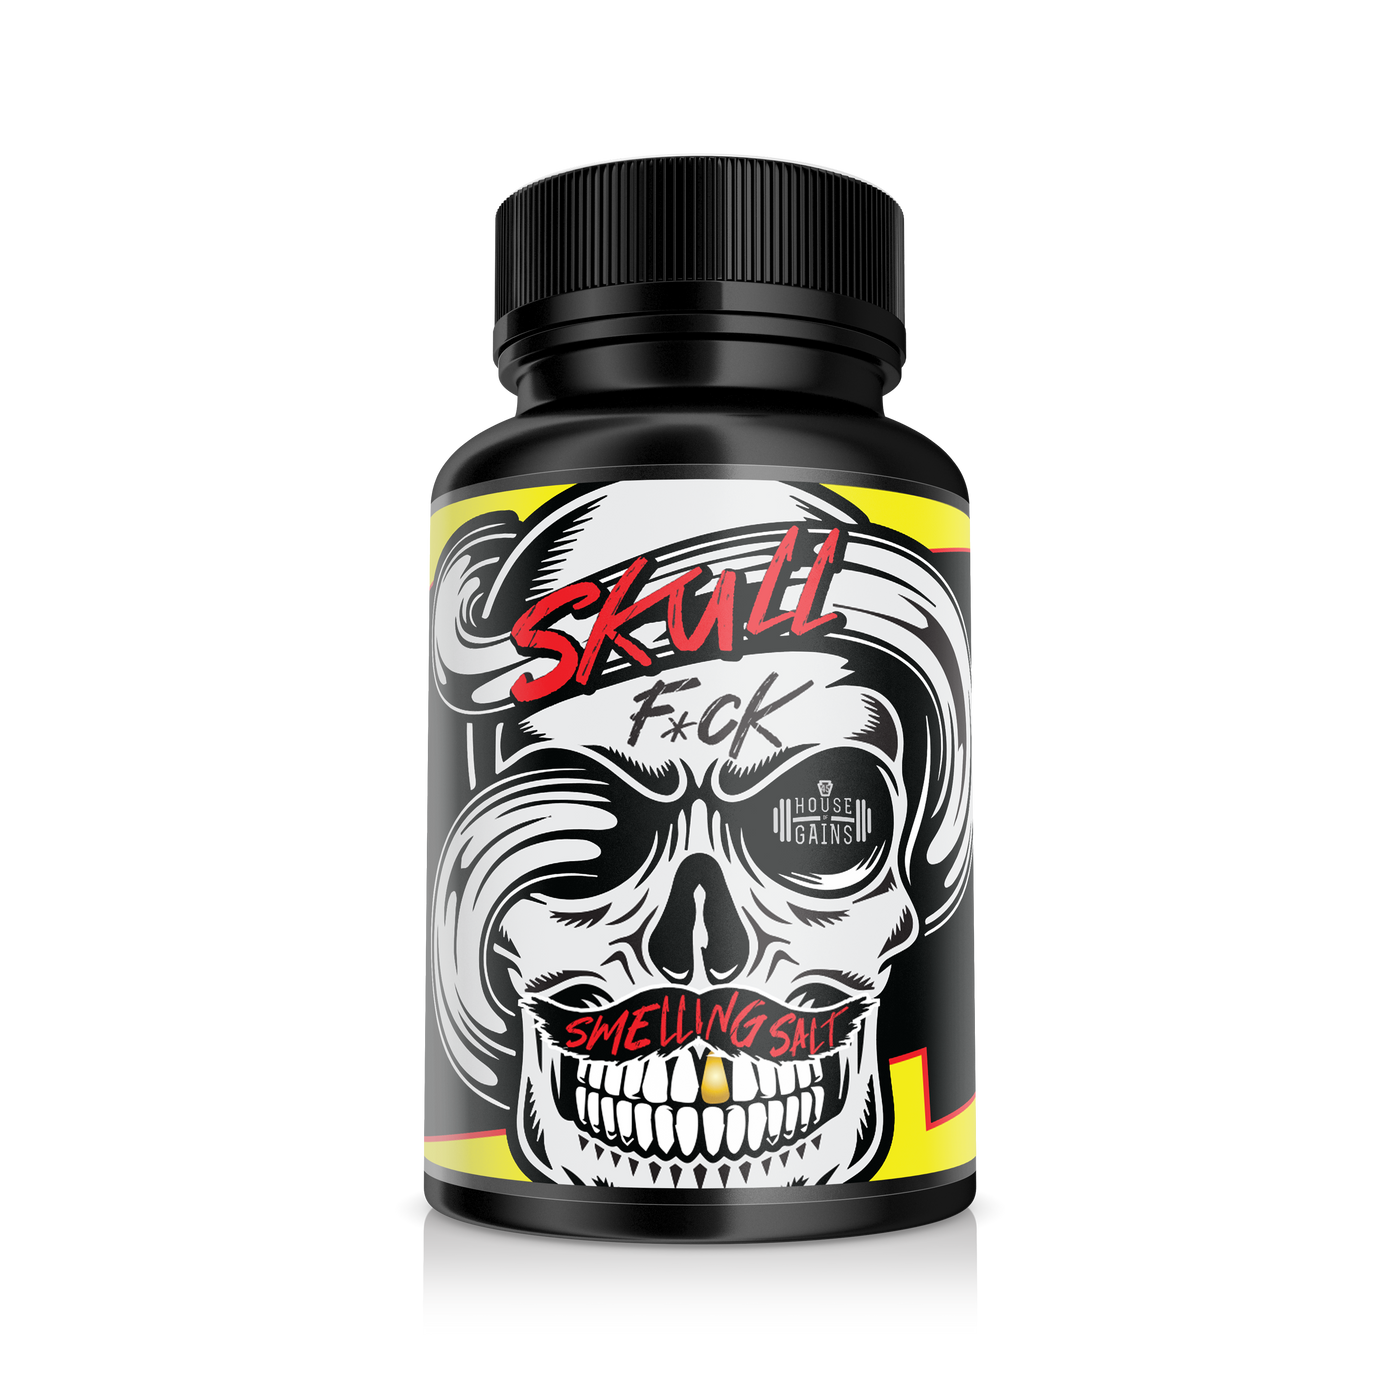 House of Gains | Skull F*** Smelling Salts House of Gains $14.95